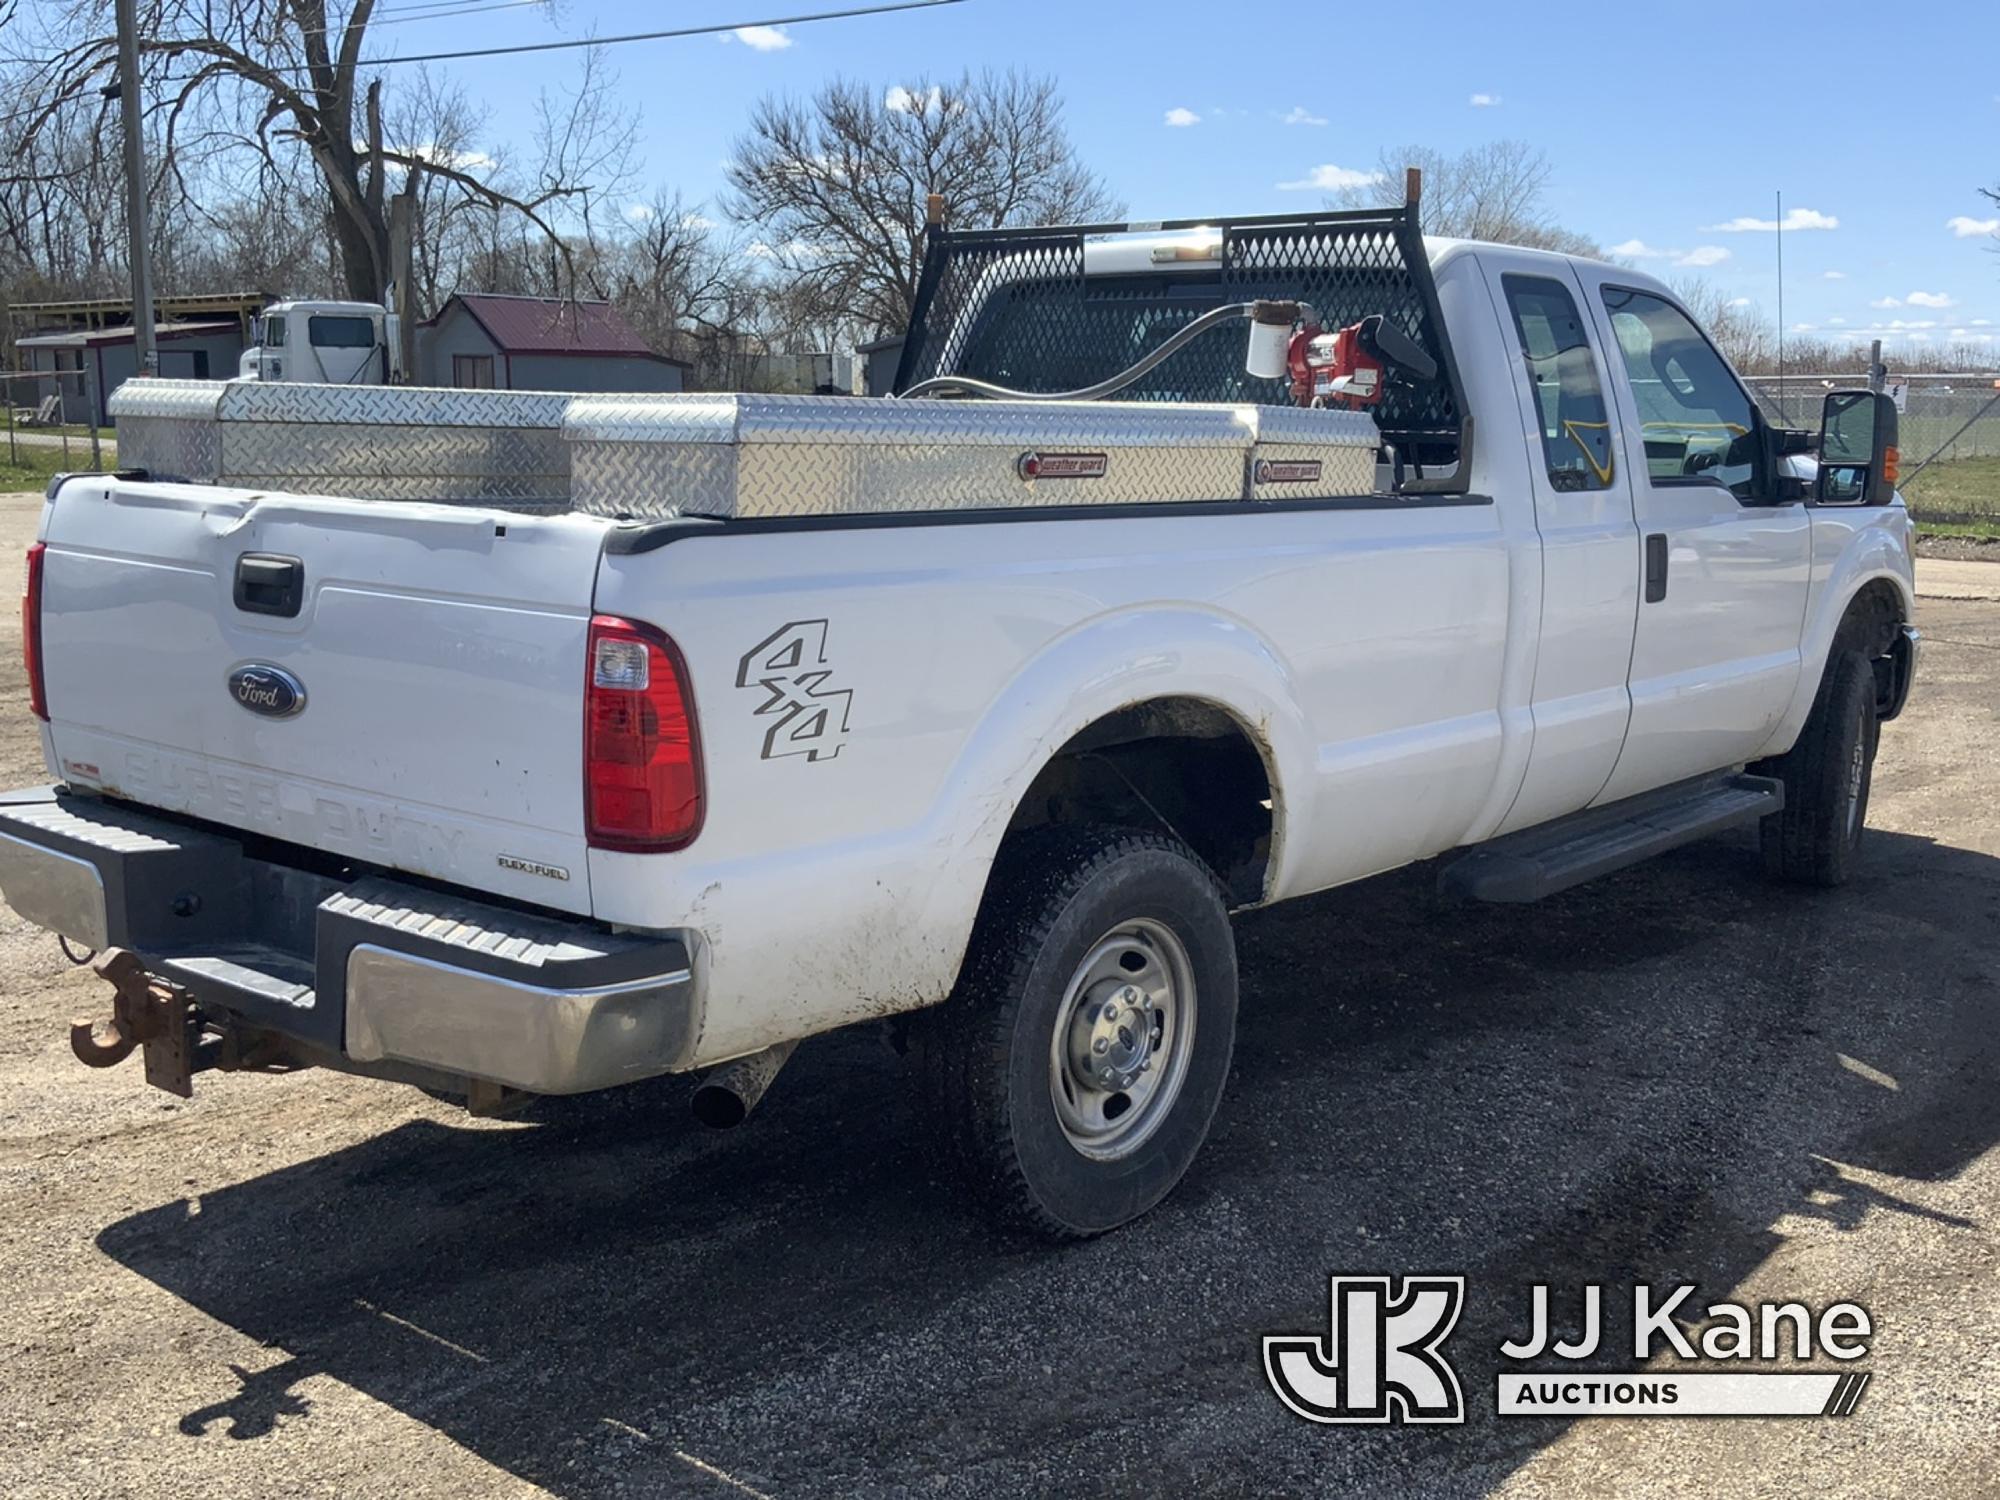 (South Beloit, IL) 2015 Ford F250 4x4 Extended-Cab Pickup Truck Runs & Moves) (Body Damage